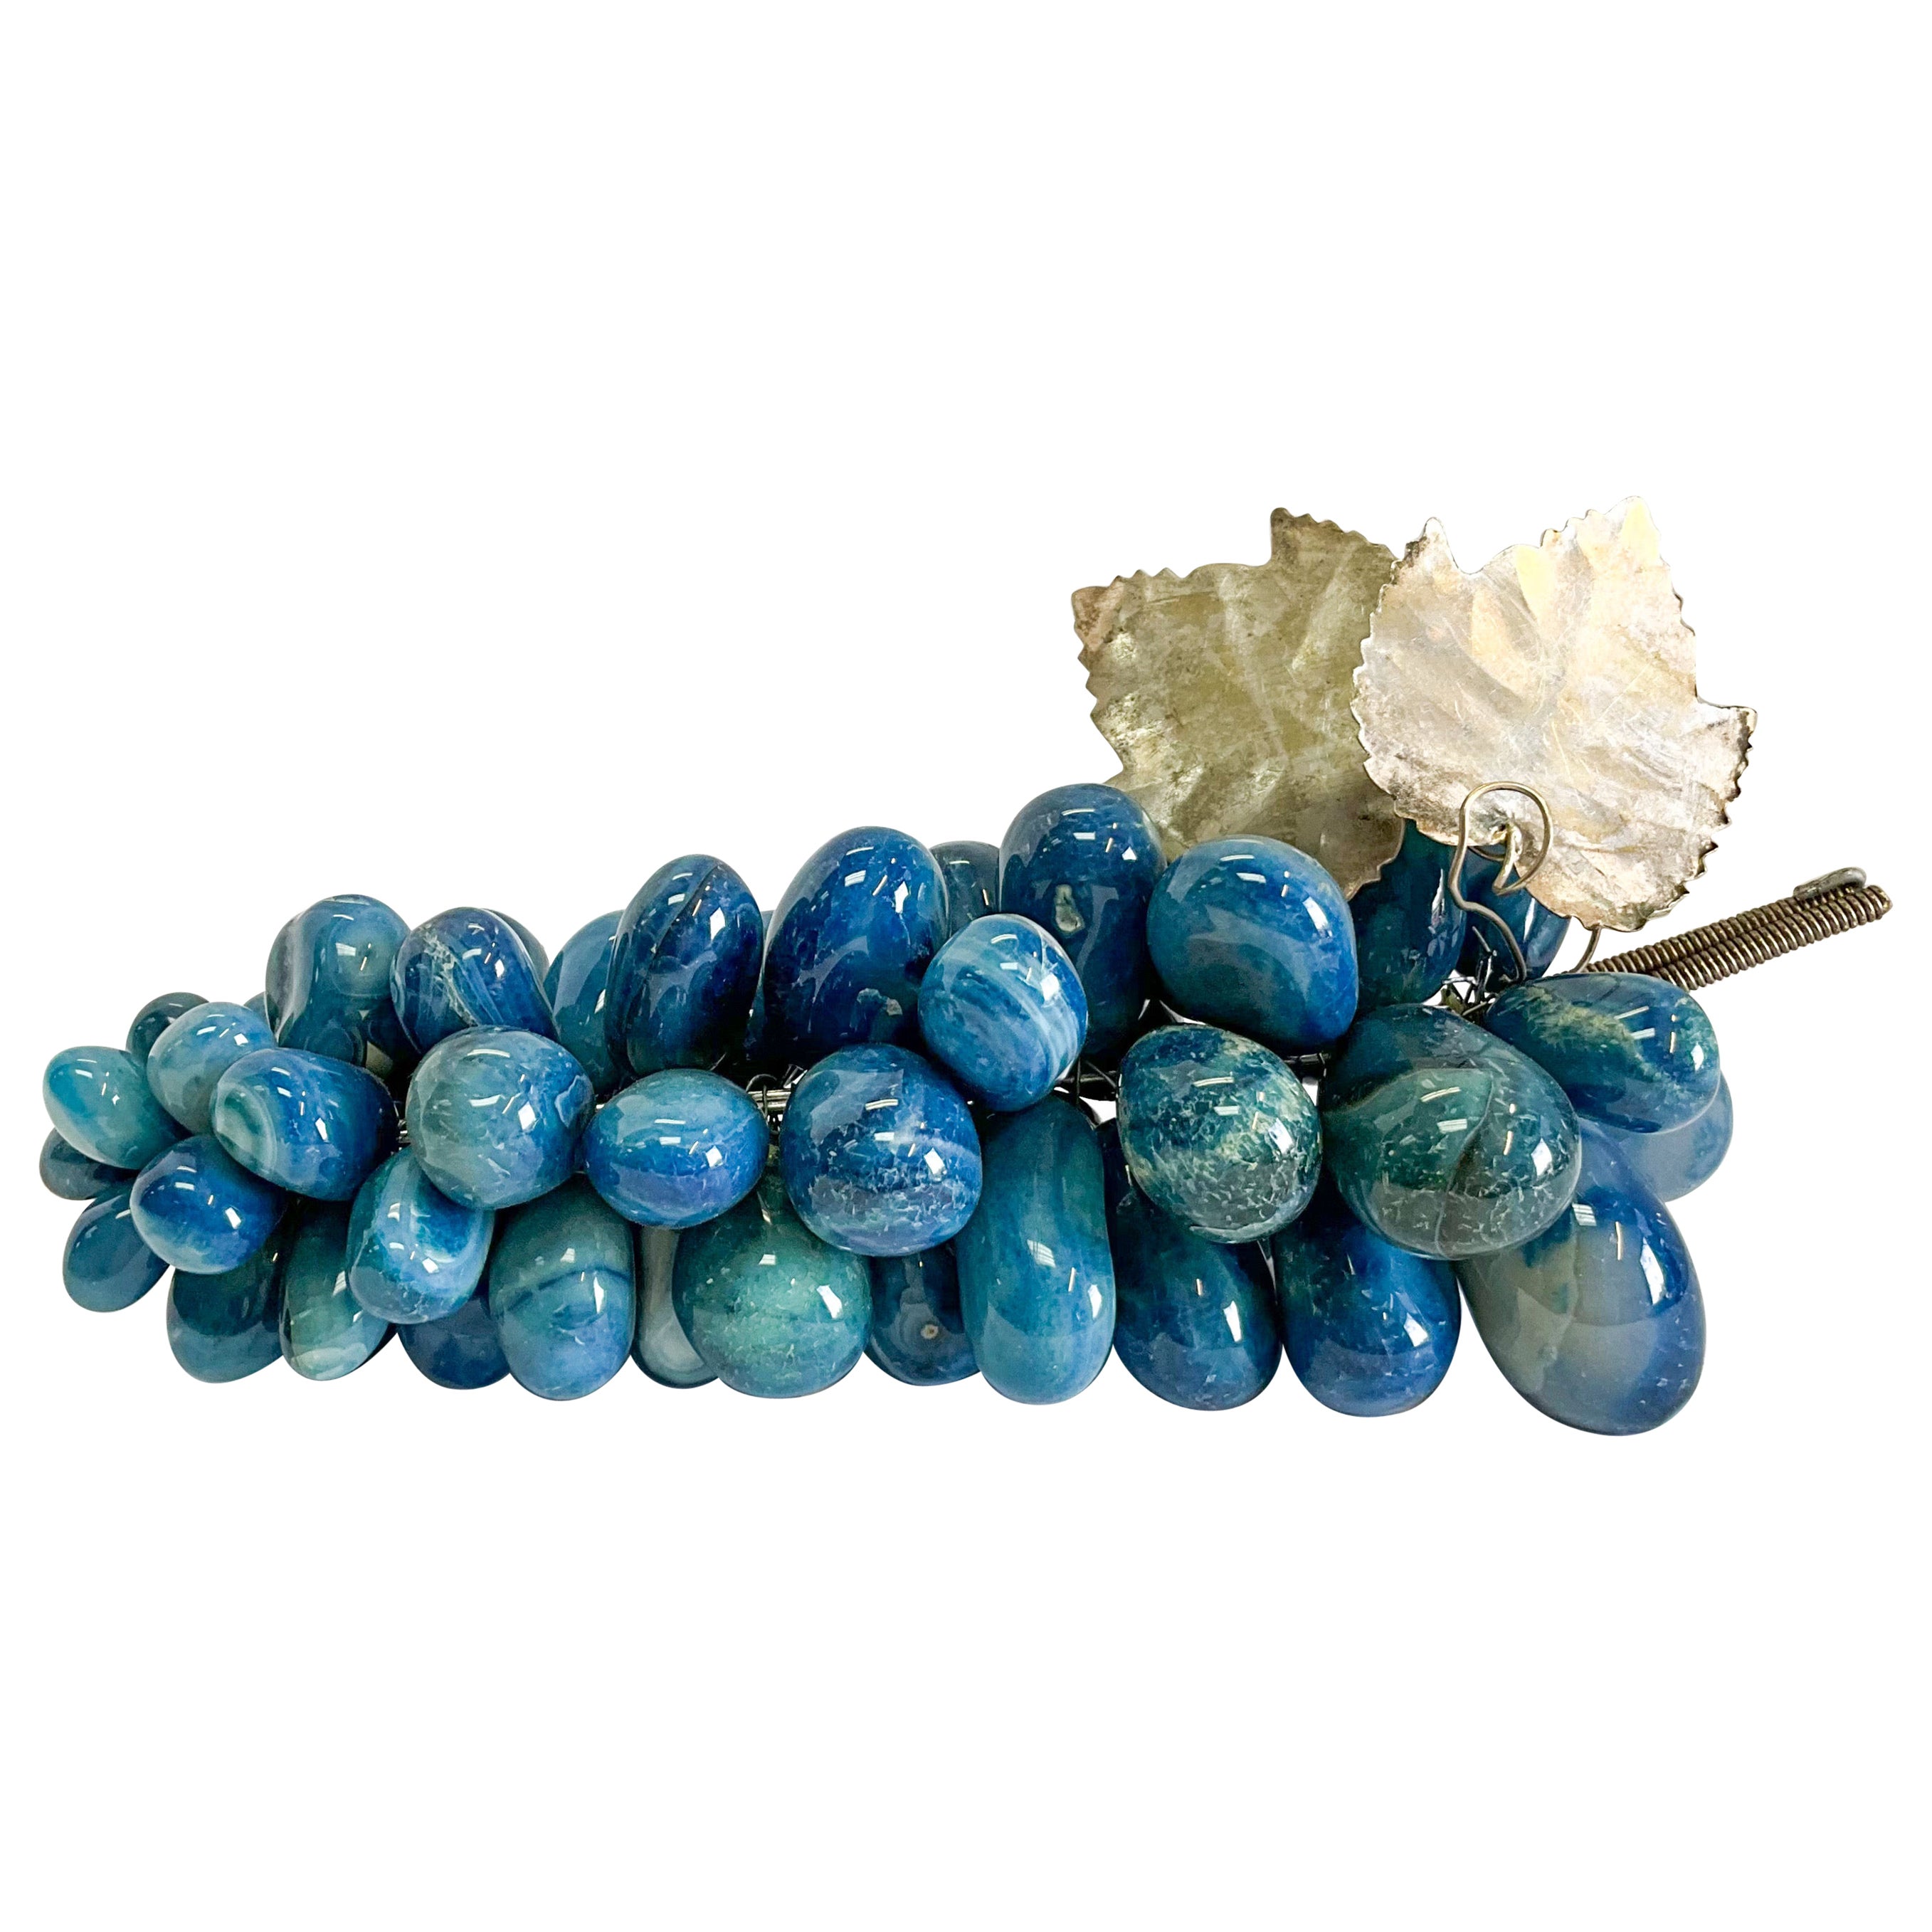 Midcentury Hollywood Regency Blue Stone / Agate Table Grapes with Silver Leaves